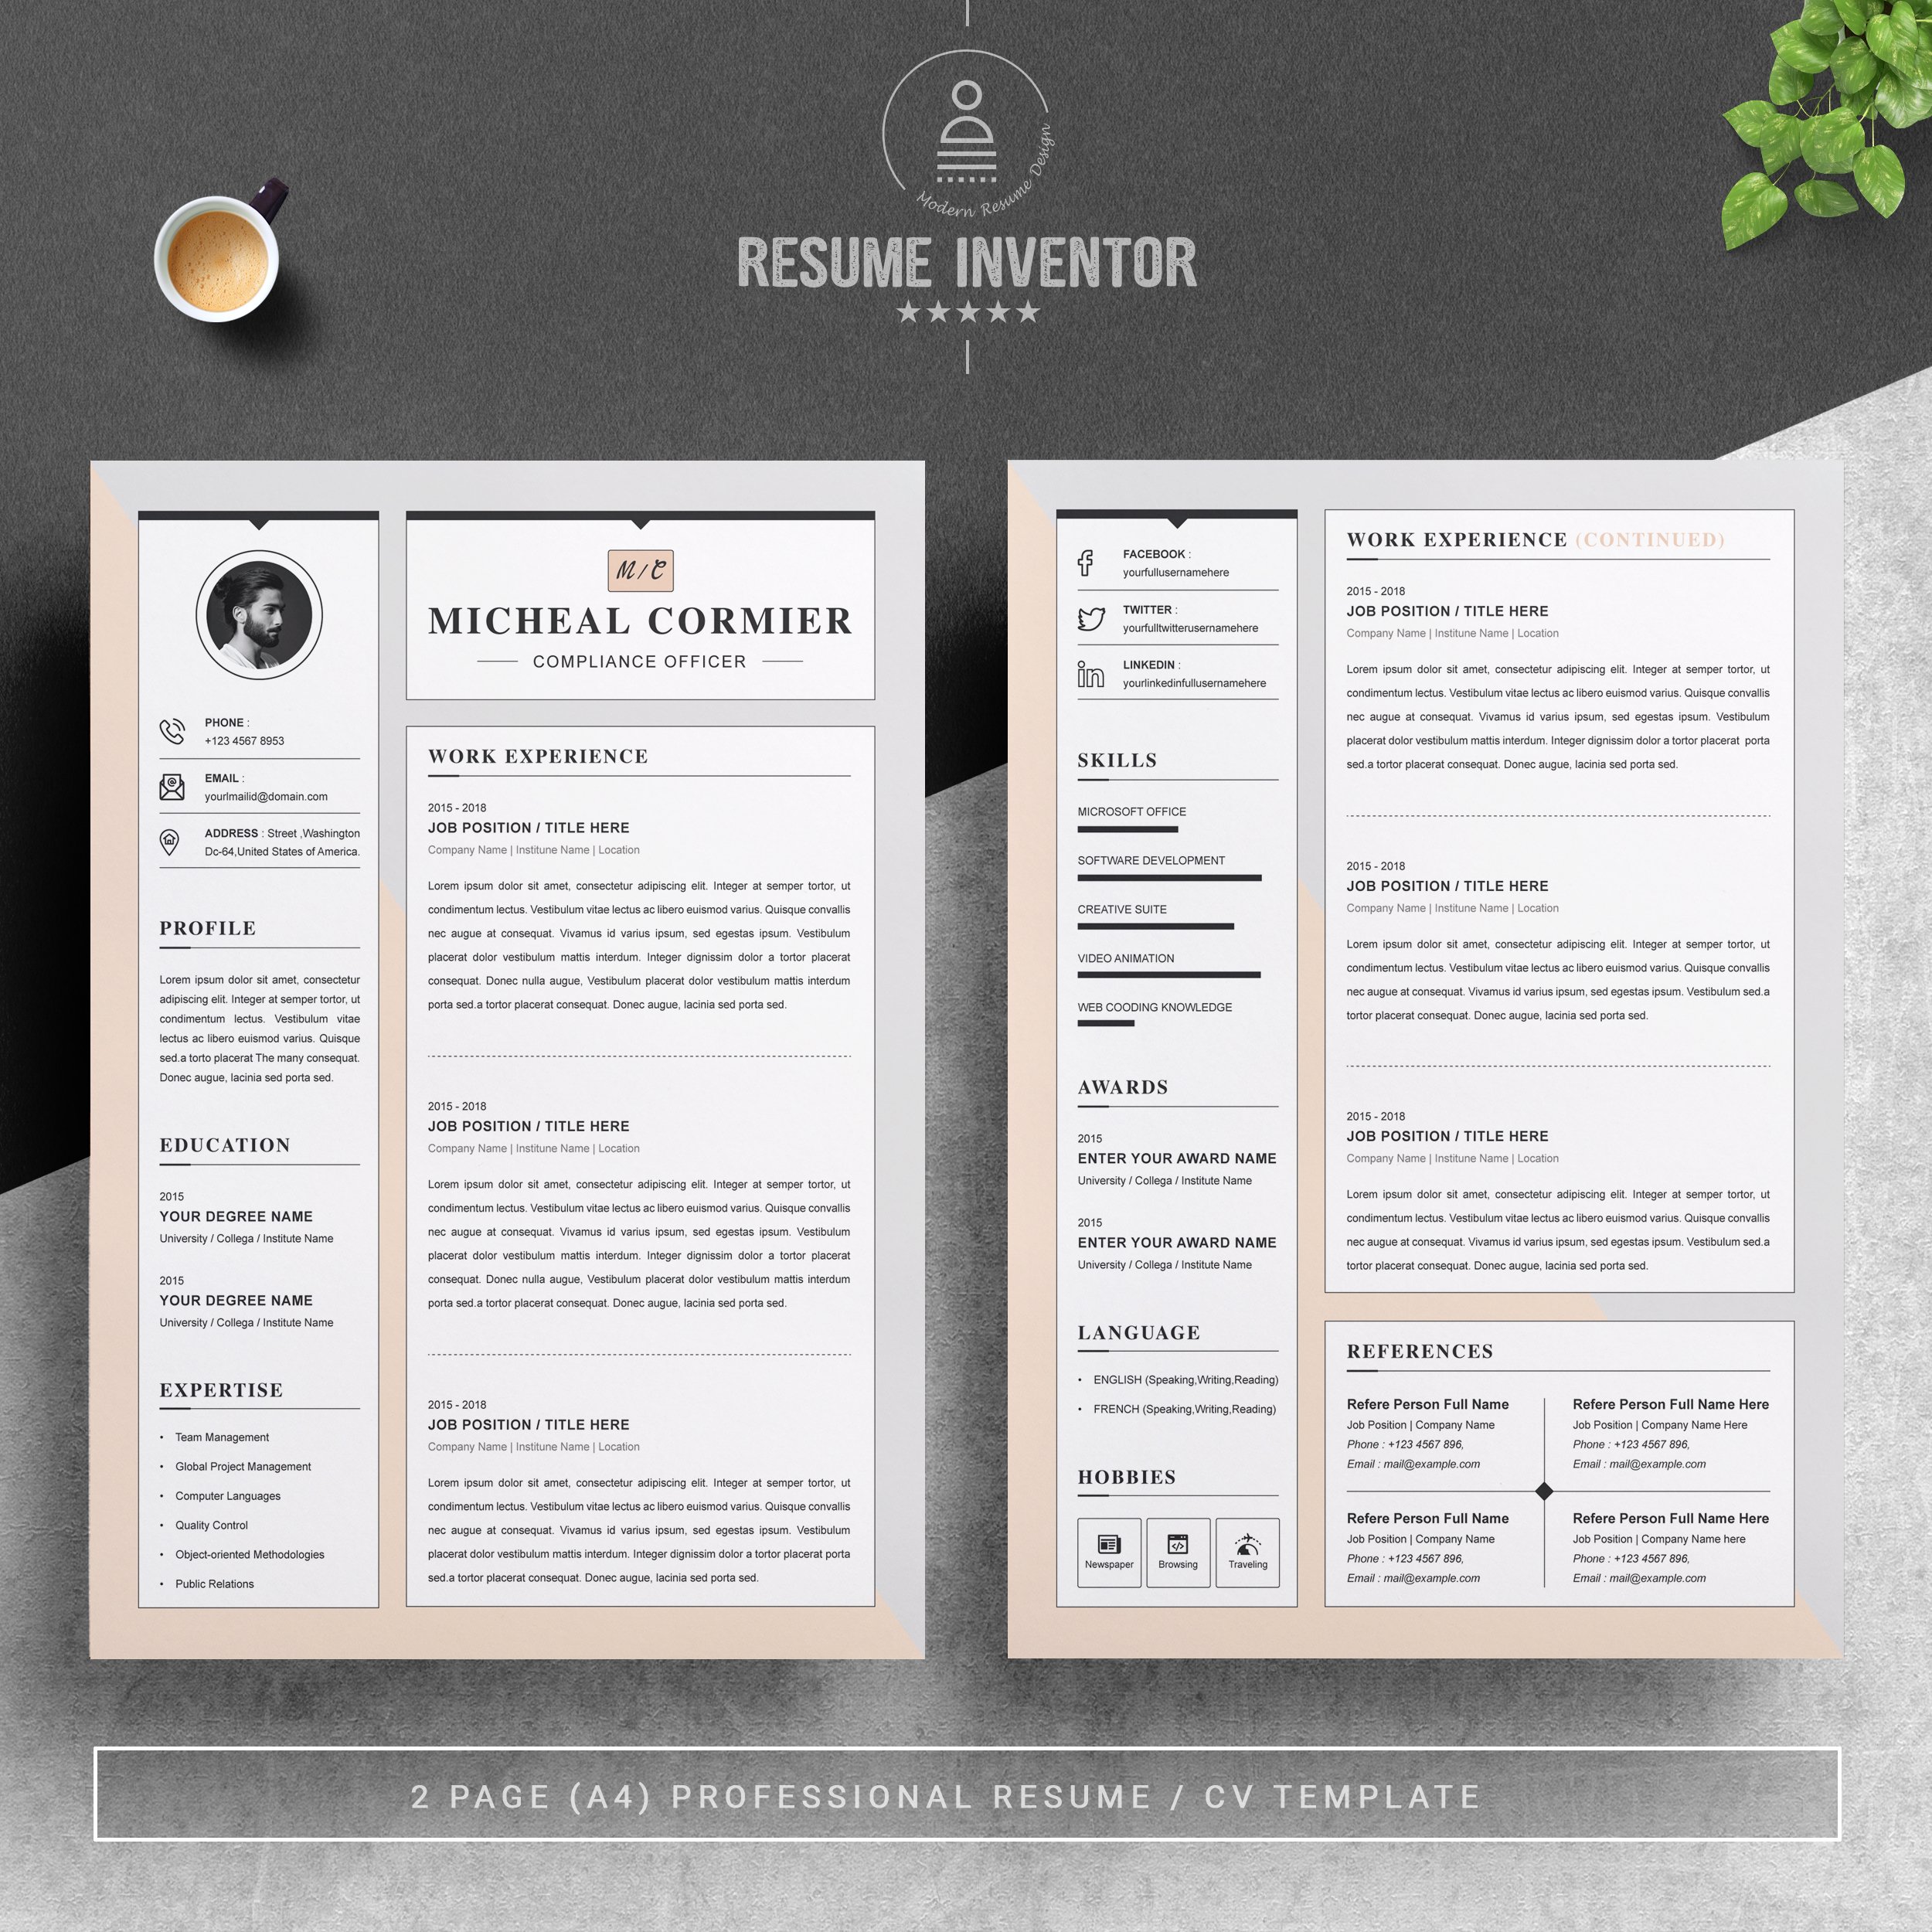 Word Resume Template| Apple Pages CV preview image.